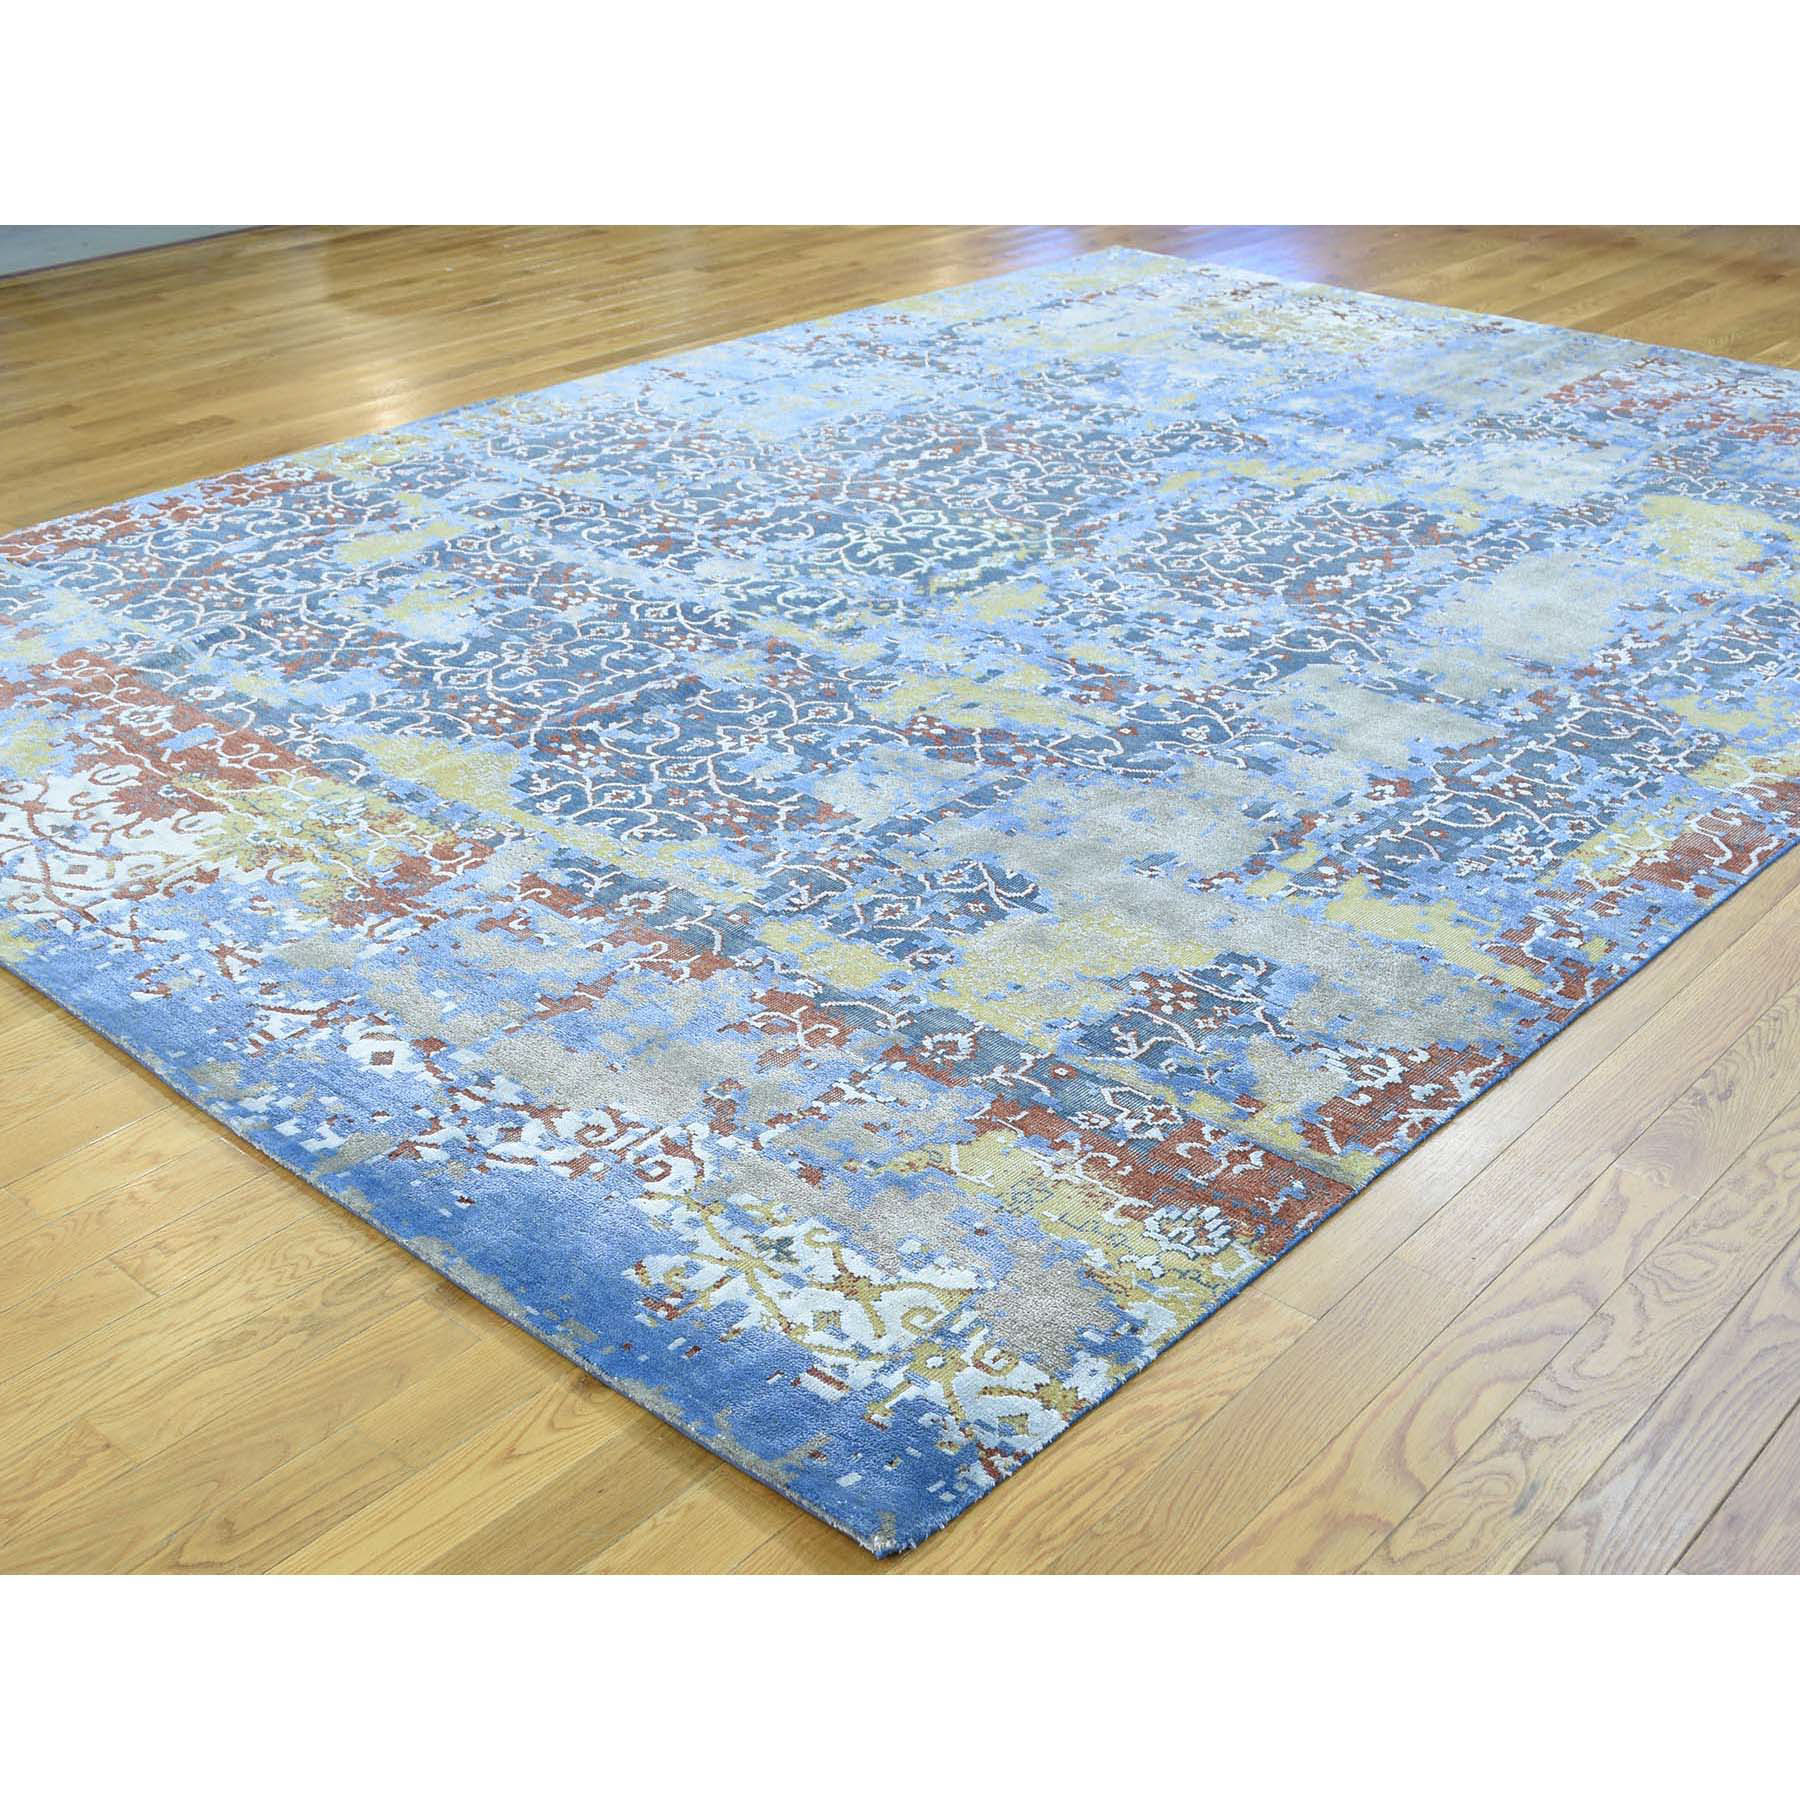 9'9"x14' Textured Wool With Silk Abstract Design Hand Made Rug 